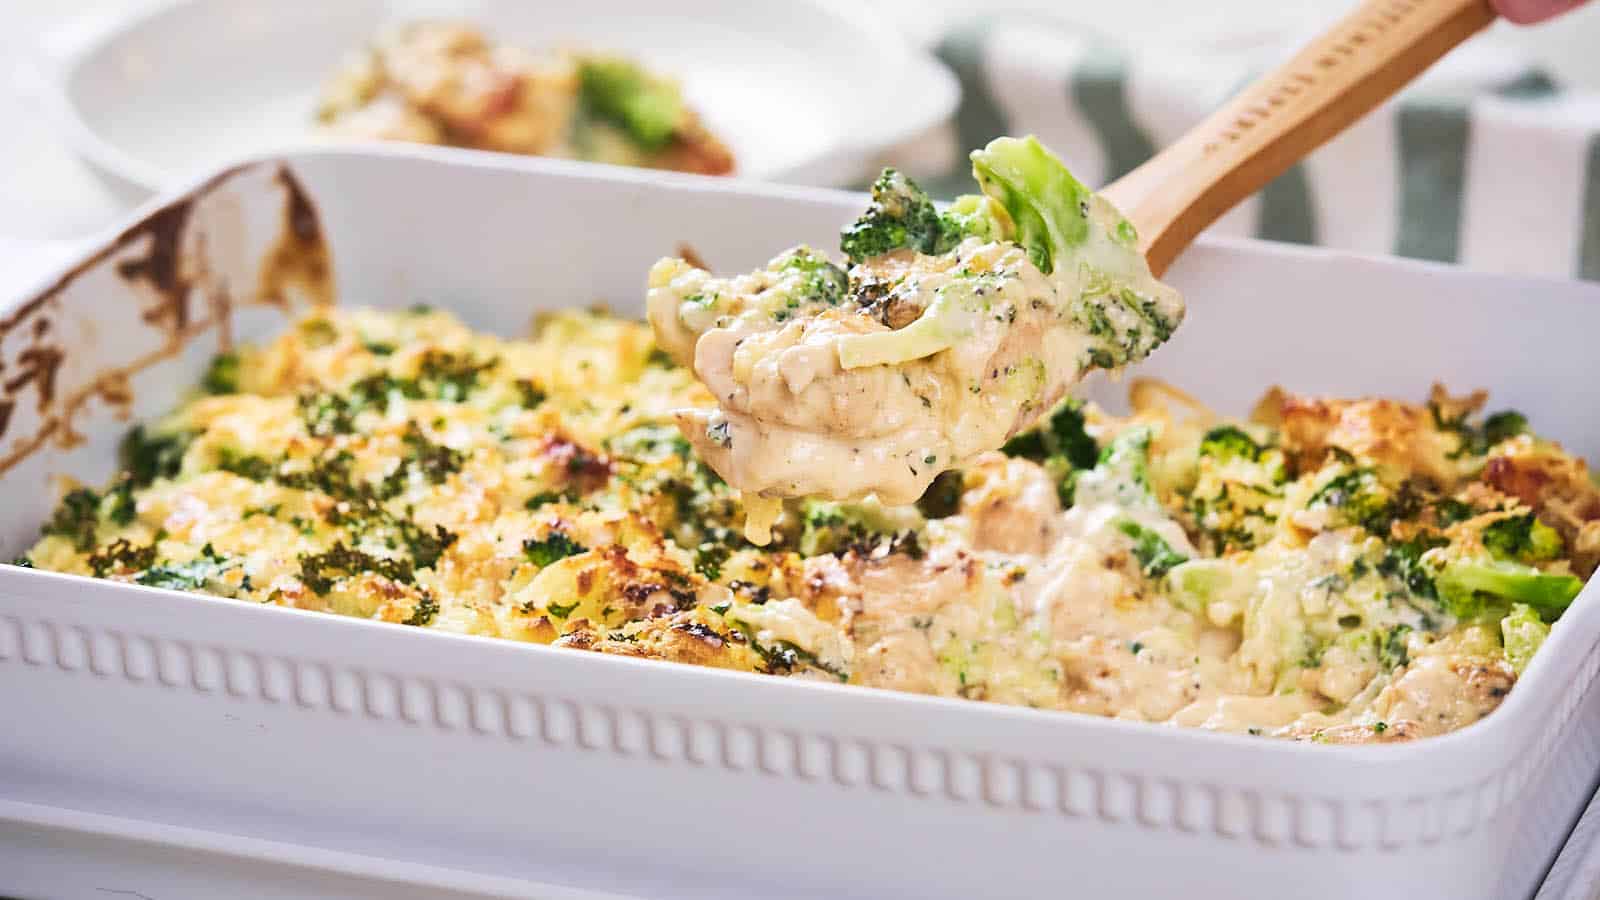 A serving utensil lifts a portion of broccoli and cheese casserole from a white baking dish.